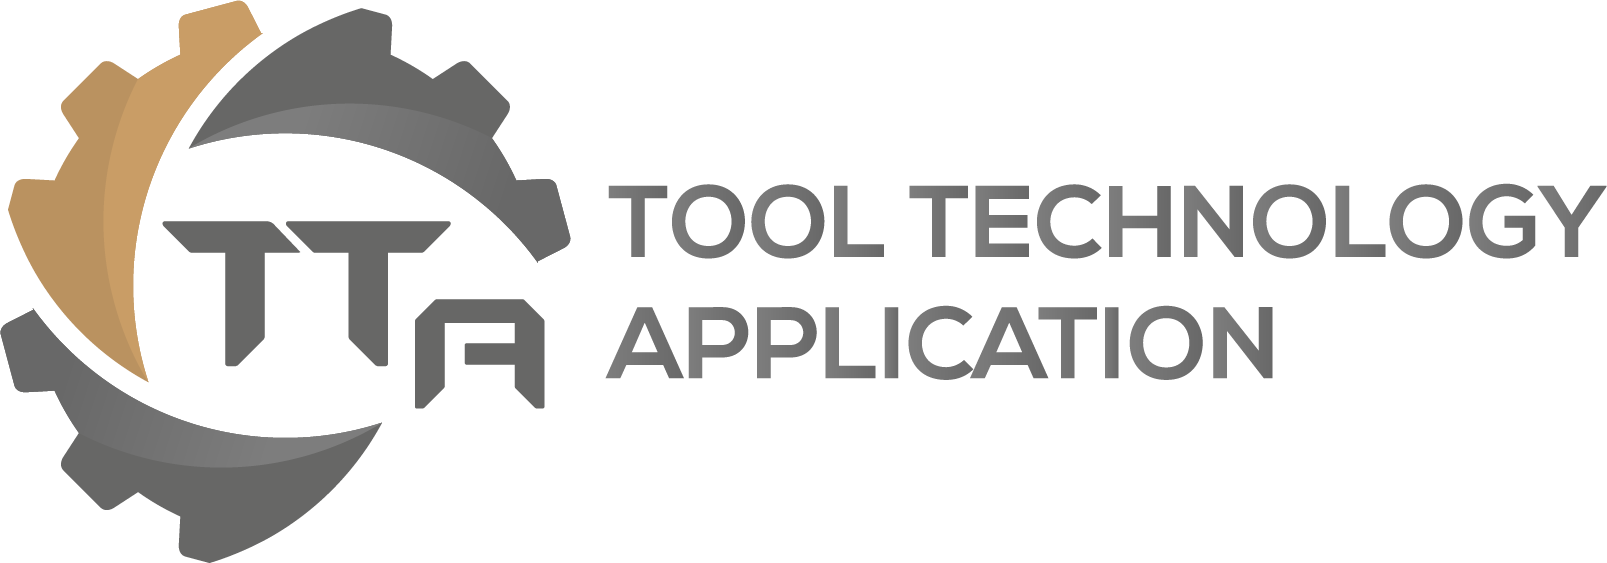 Tool Technology Application